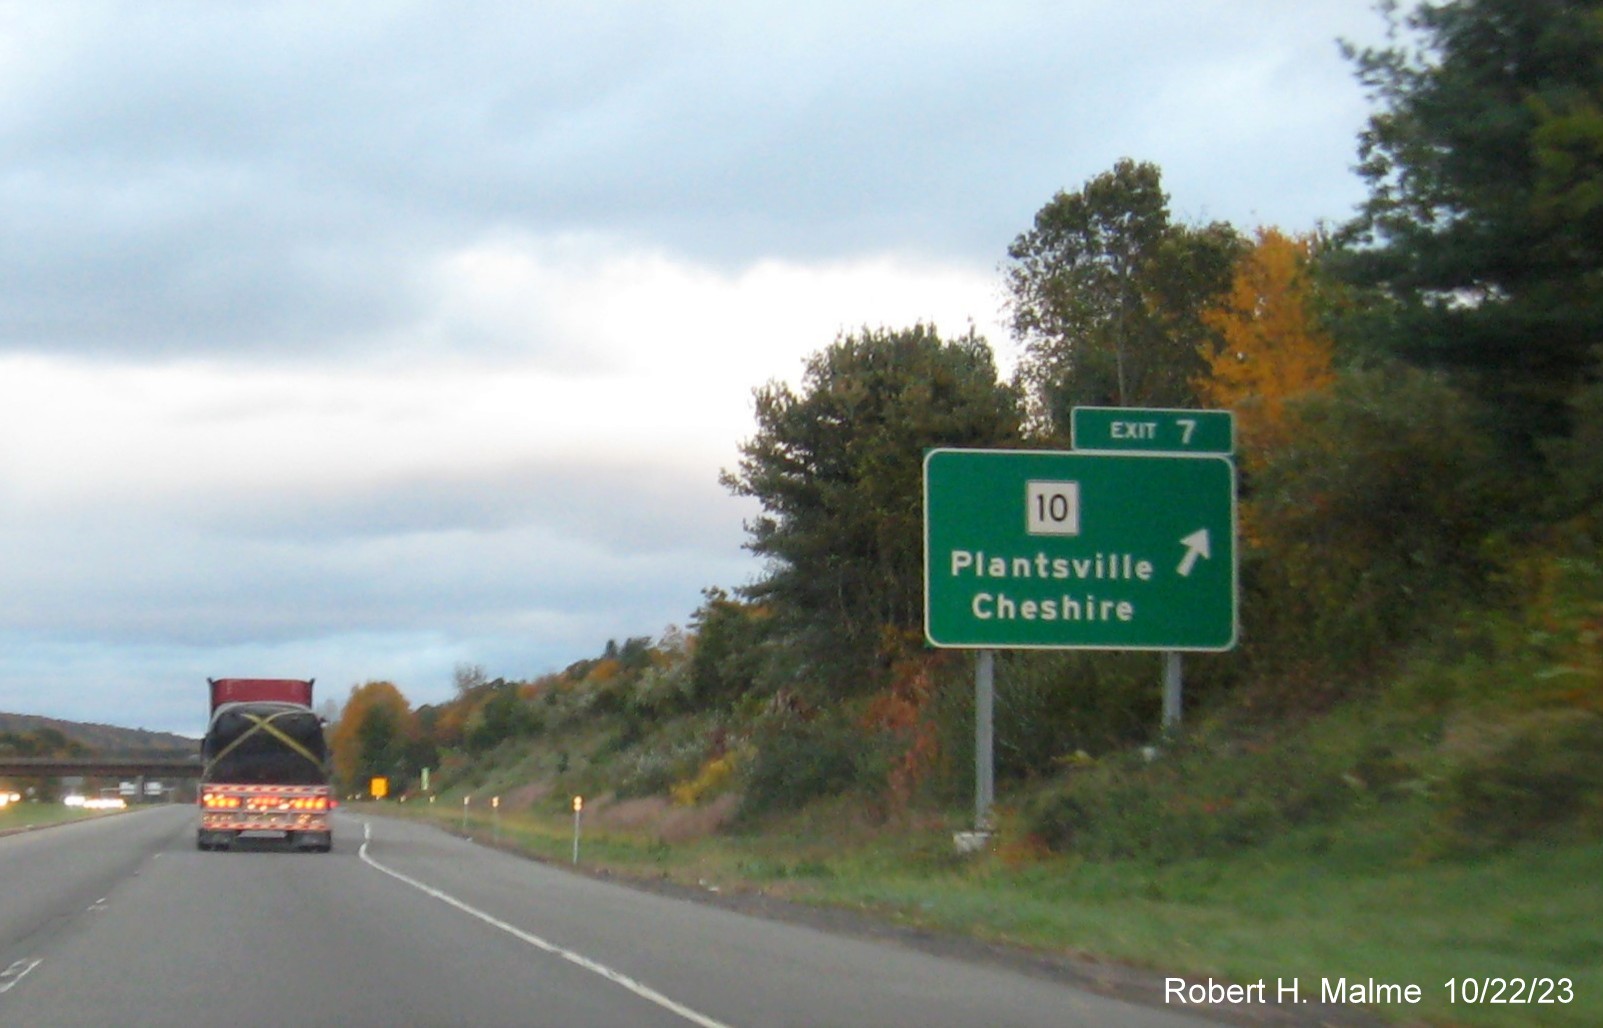 Image of new 1 mile advance sign for CT 10 exit with milepost based exit number on I-691 East in Cheshire, 
          October 2023